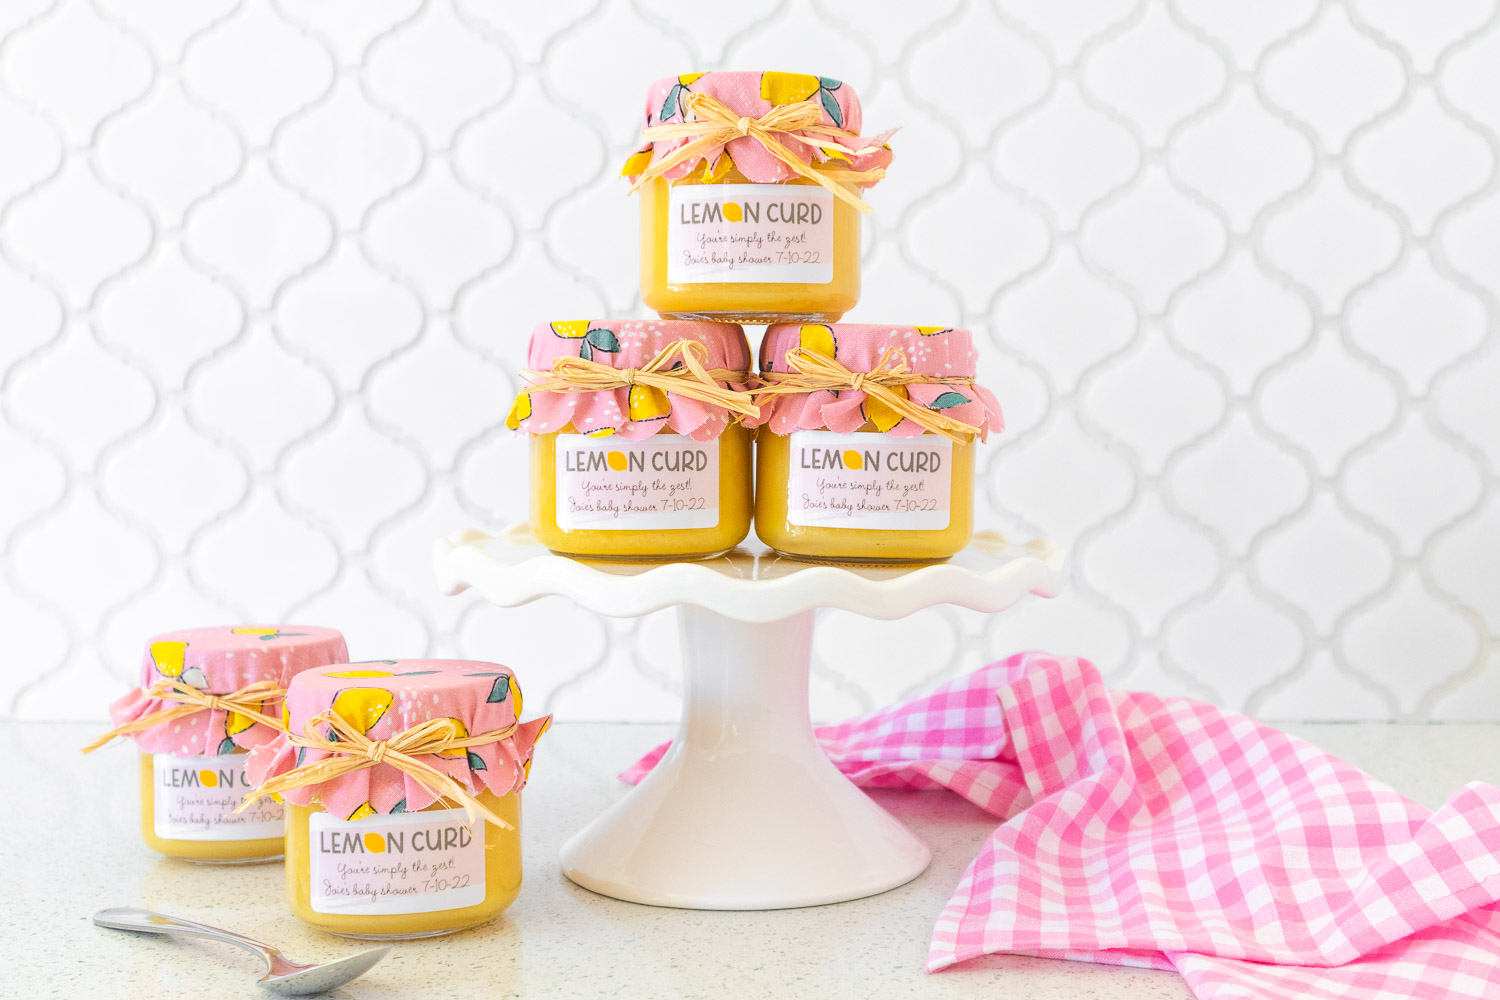 Lemon curd decorated with pink fabric jar covers and custom labels. A few are stacked on a white ceramic cake stand and two are off to the side. There's a bright pink gingham napkin in the right corner.